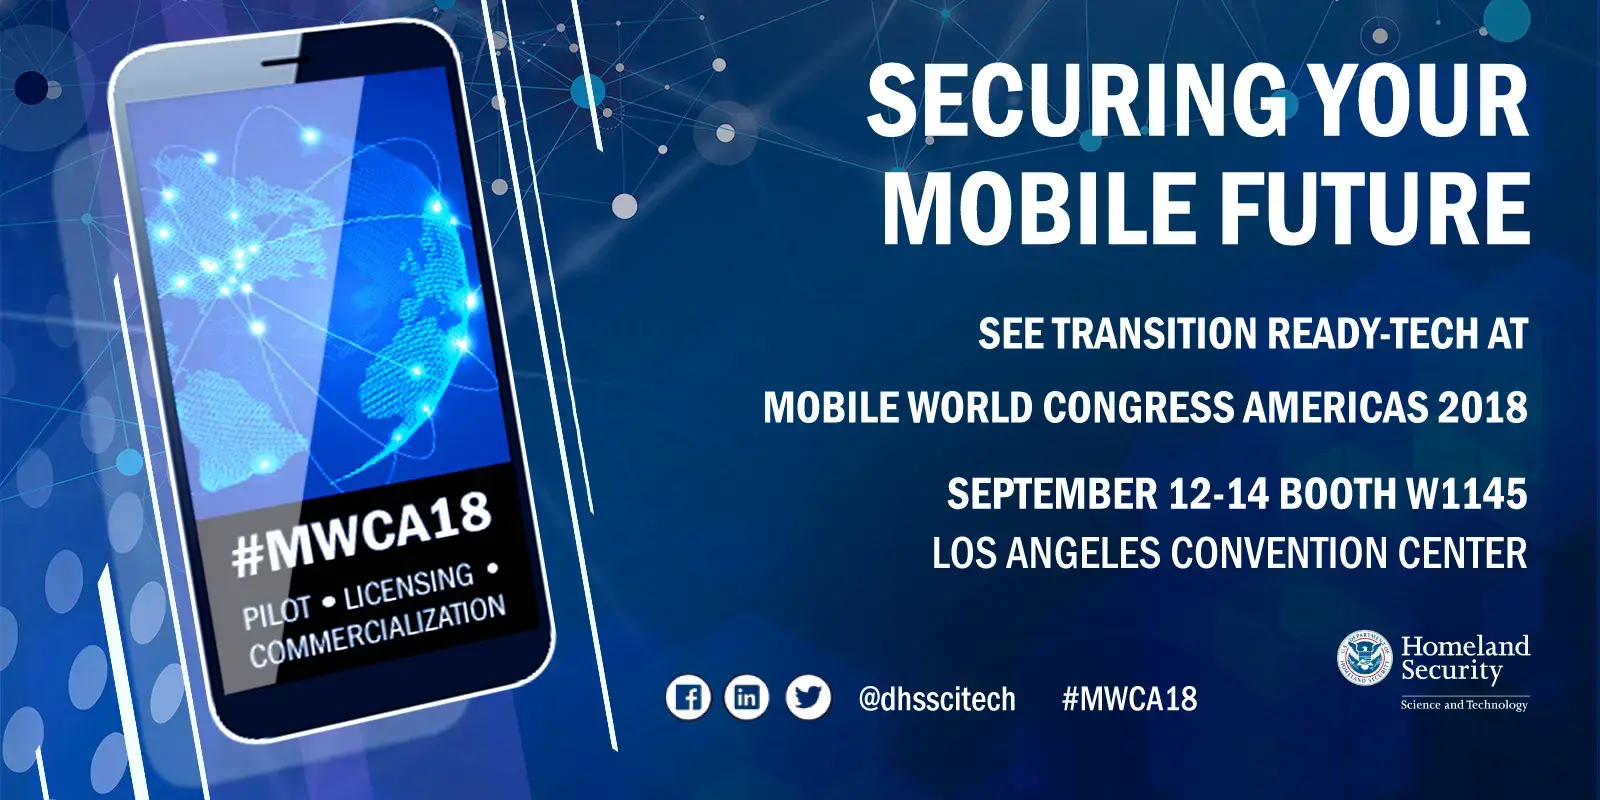 Securinig Your Mobile Future, See transition ready-tech for pilots, licensing and commercialization at Mobile World Congress Americas 2018; September 12 - 14 in Booth W1145 Los Angeles Convention Center. Follow us on social media @dhsscitech #MWCA. 